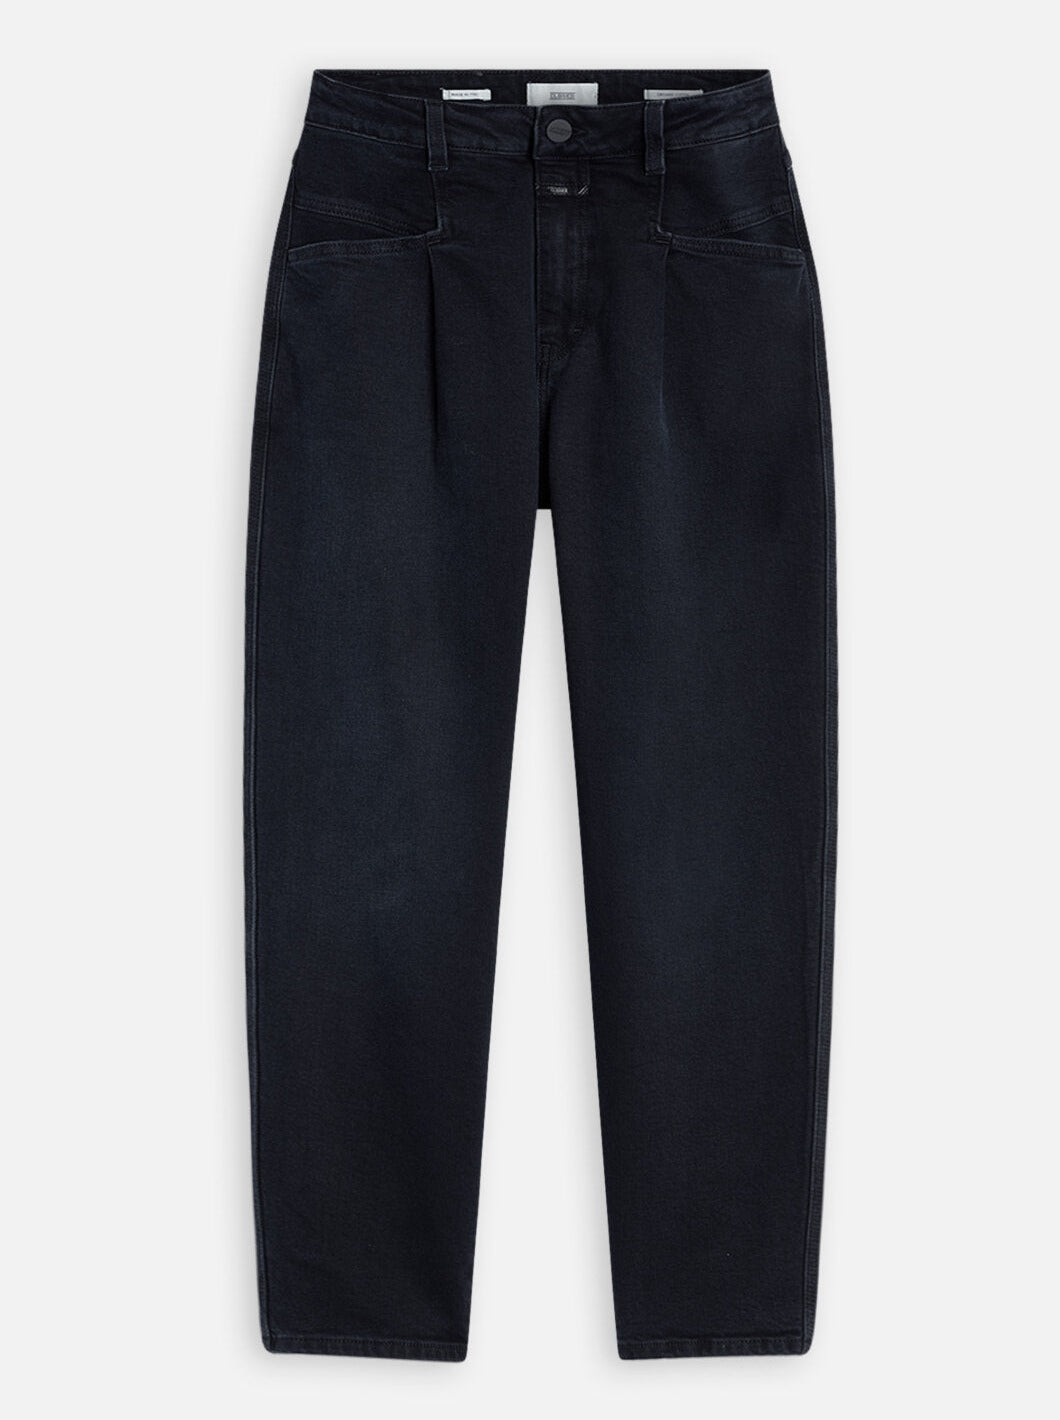 A BETTER BLUE PEARL DENIM | BLUE BLACK FROM CLOSED